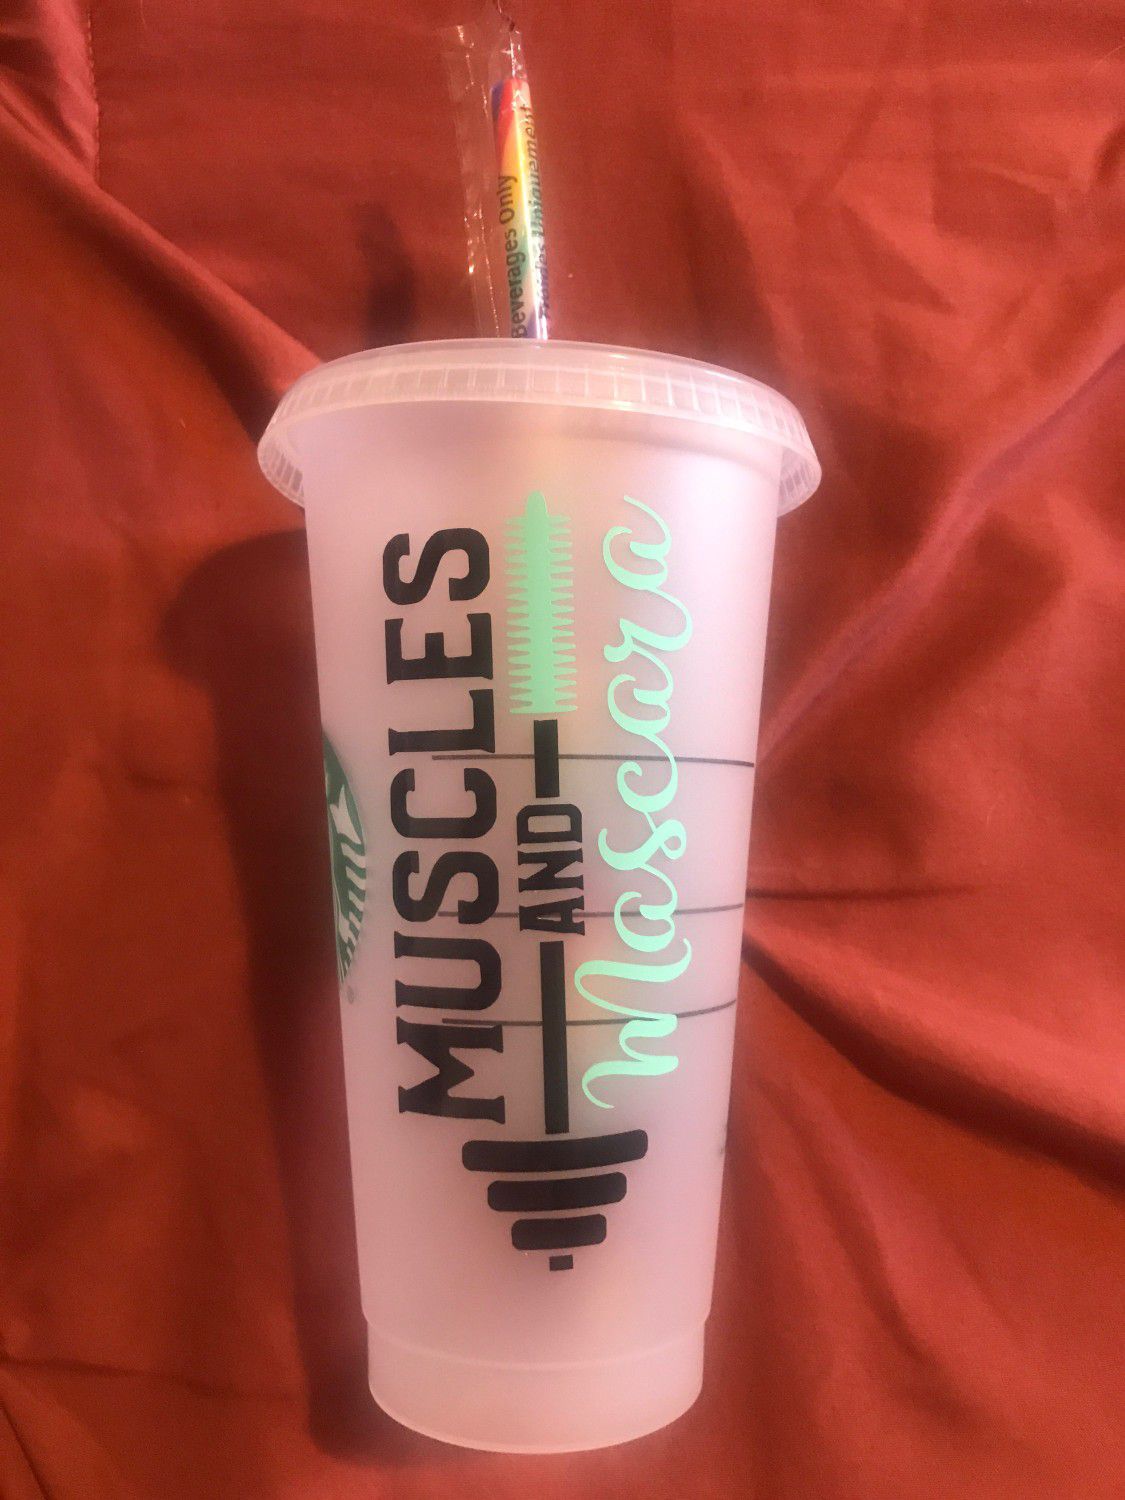 Starbucks personalized cup, muscles and mascara